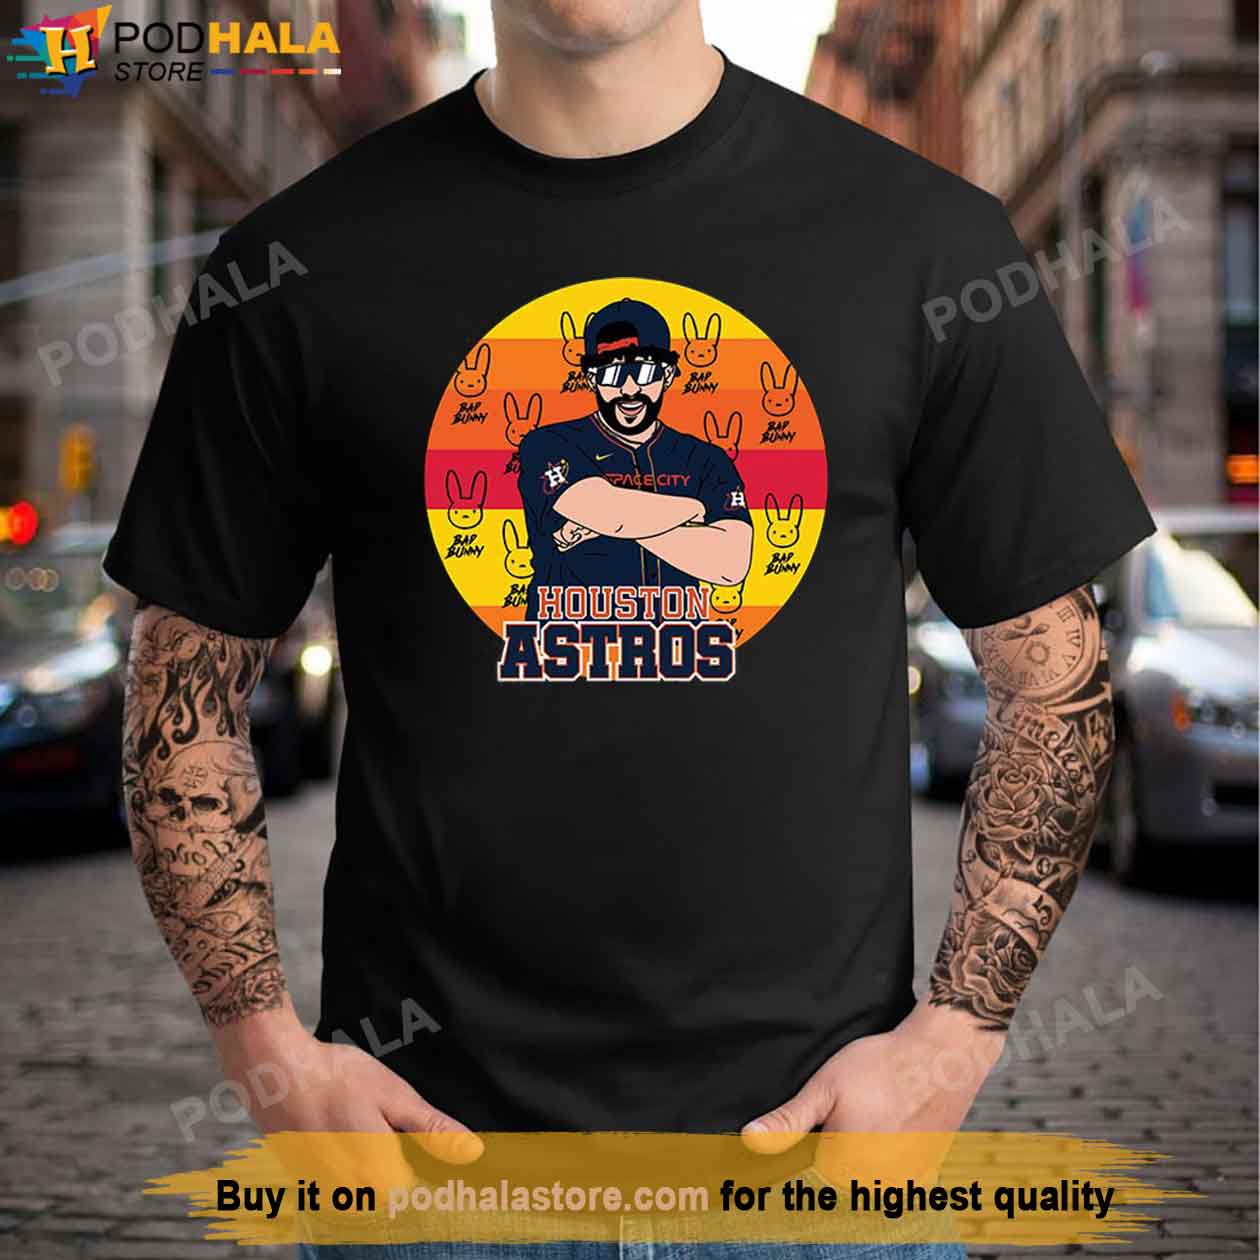 astros t shirts for sale